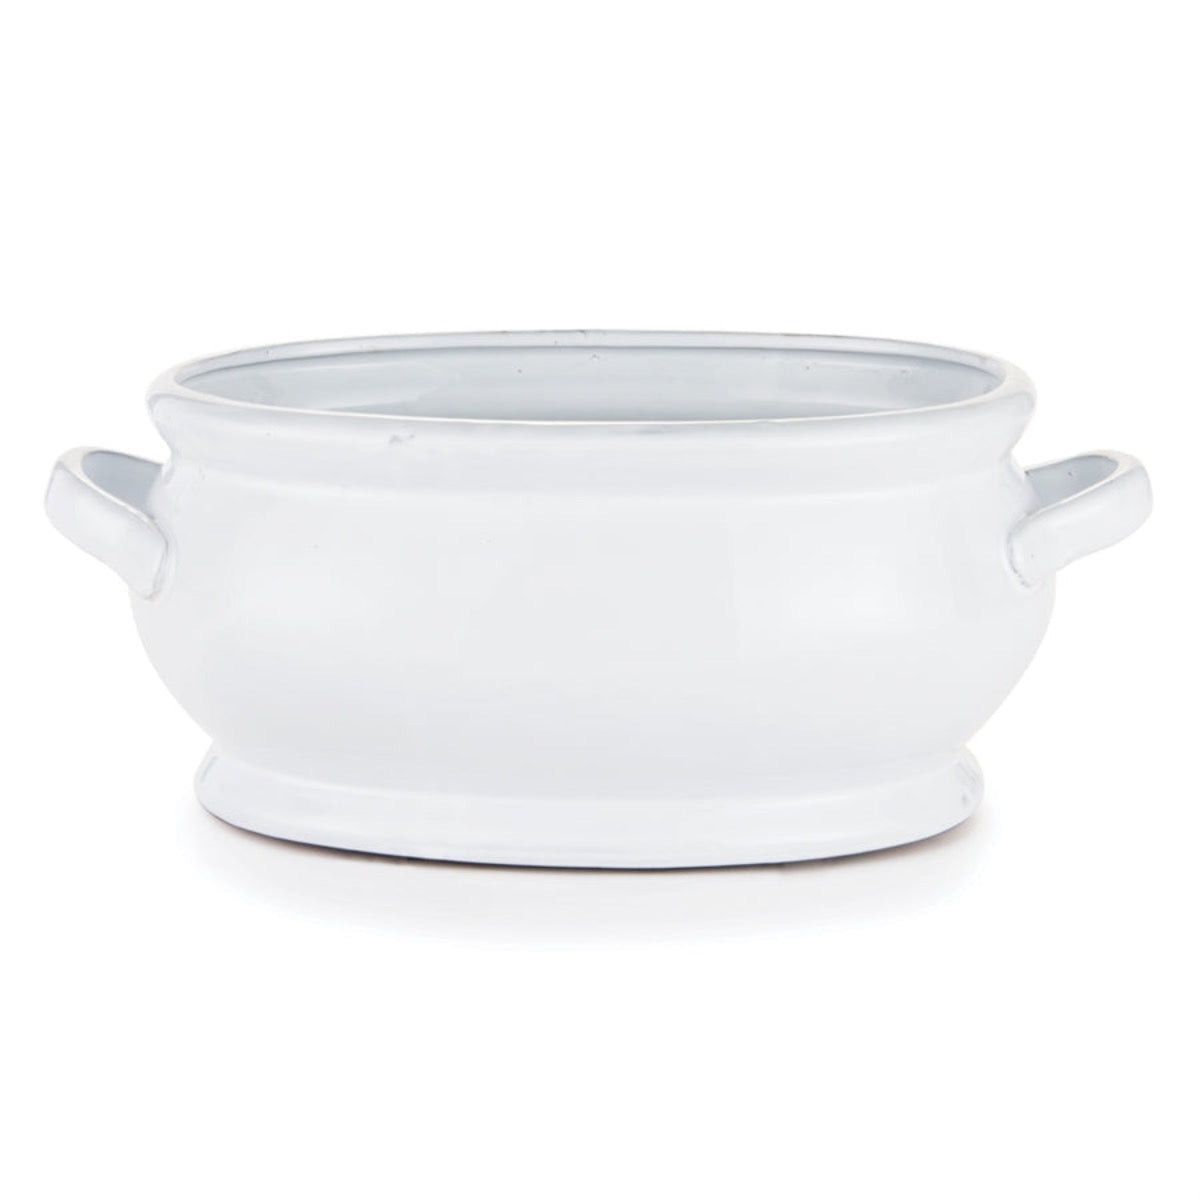 Cora Oval Cachepot. Front view.